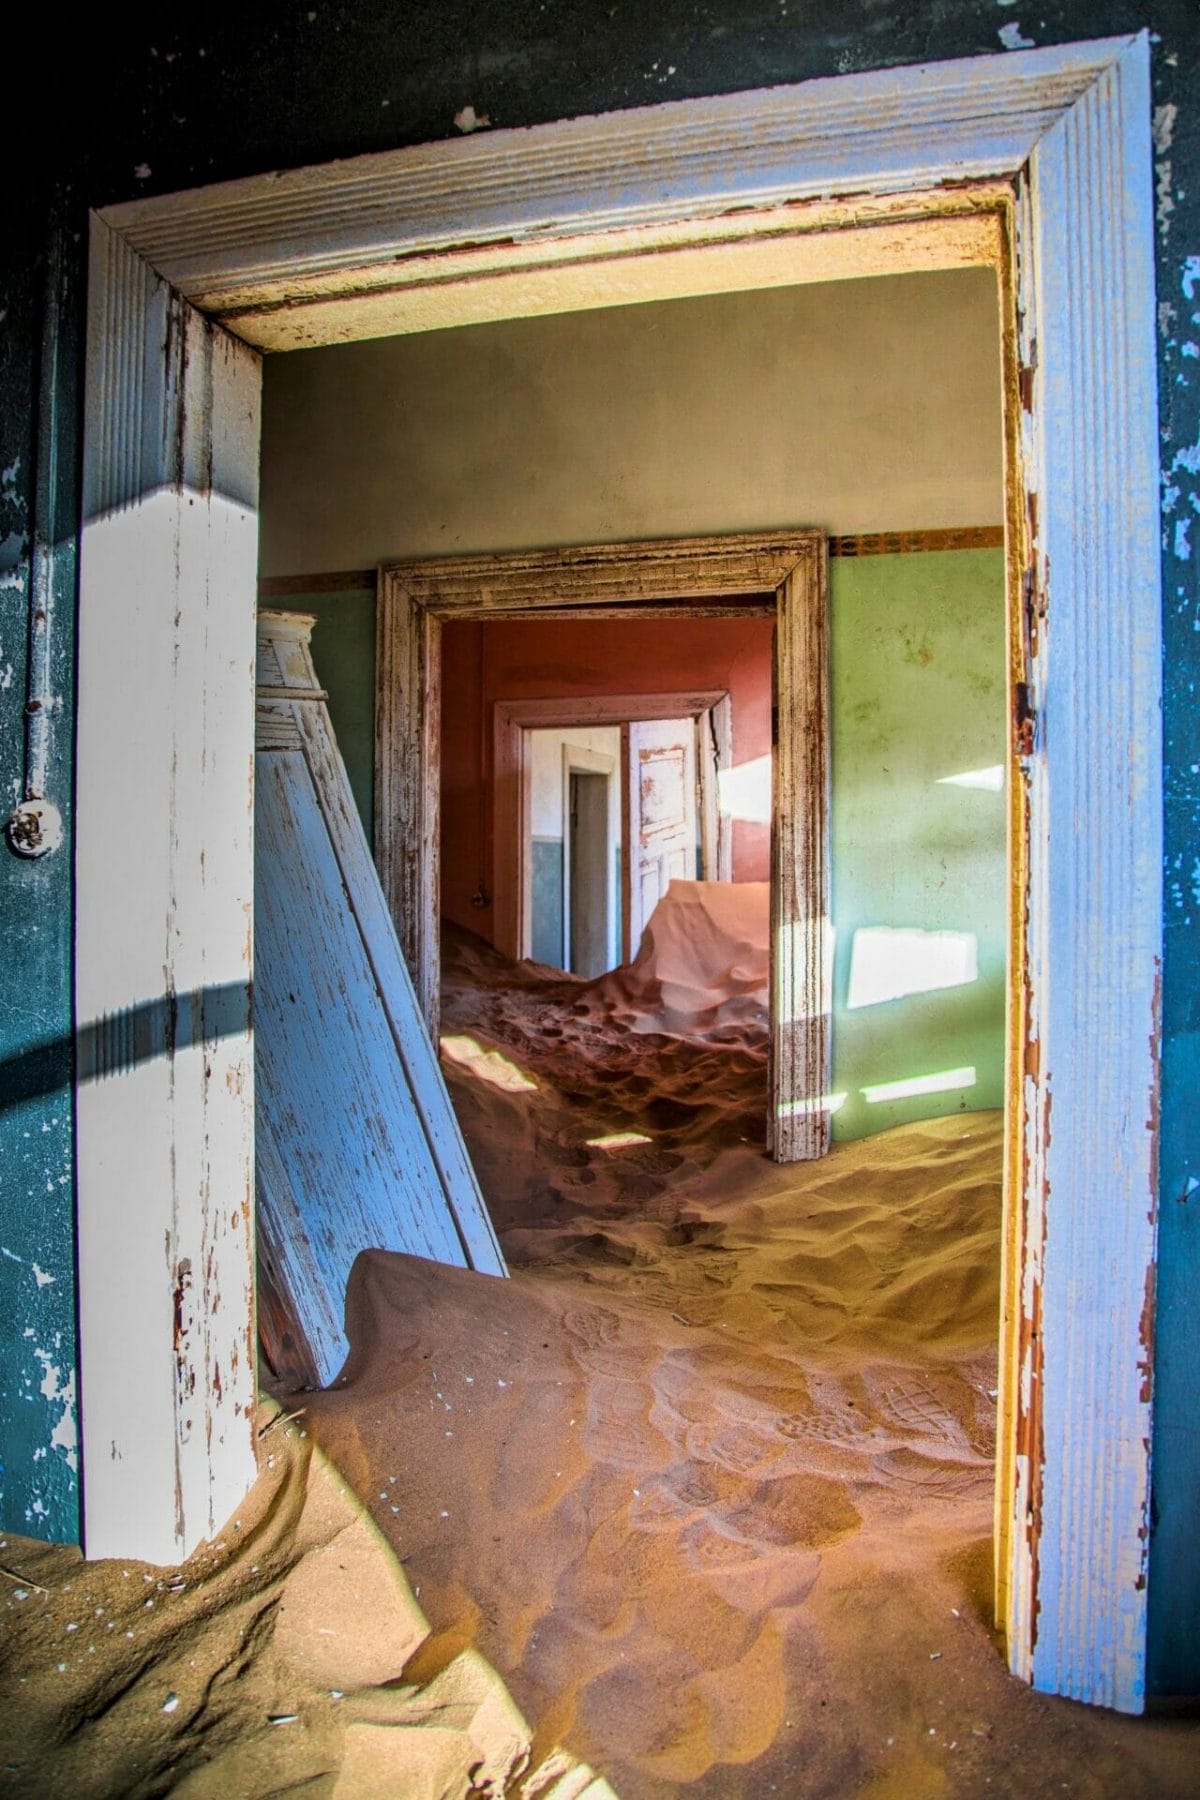 Another view of the sand filled house, looking through several doorways, with different colored rooms, and interesting play of light and shadows.